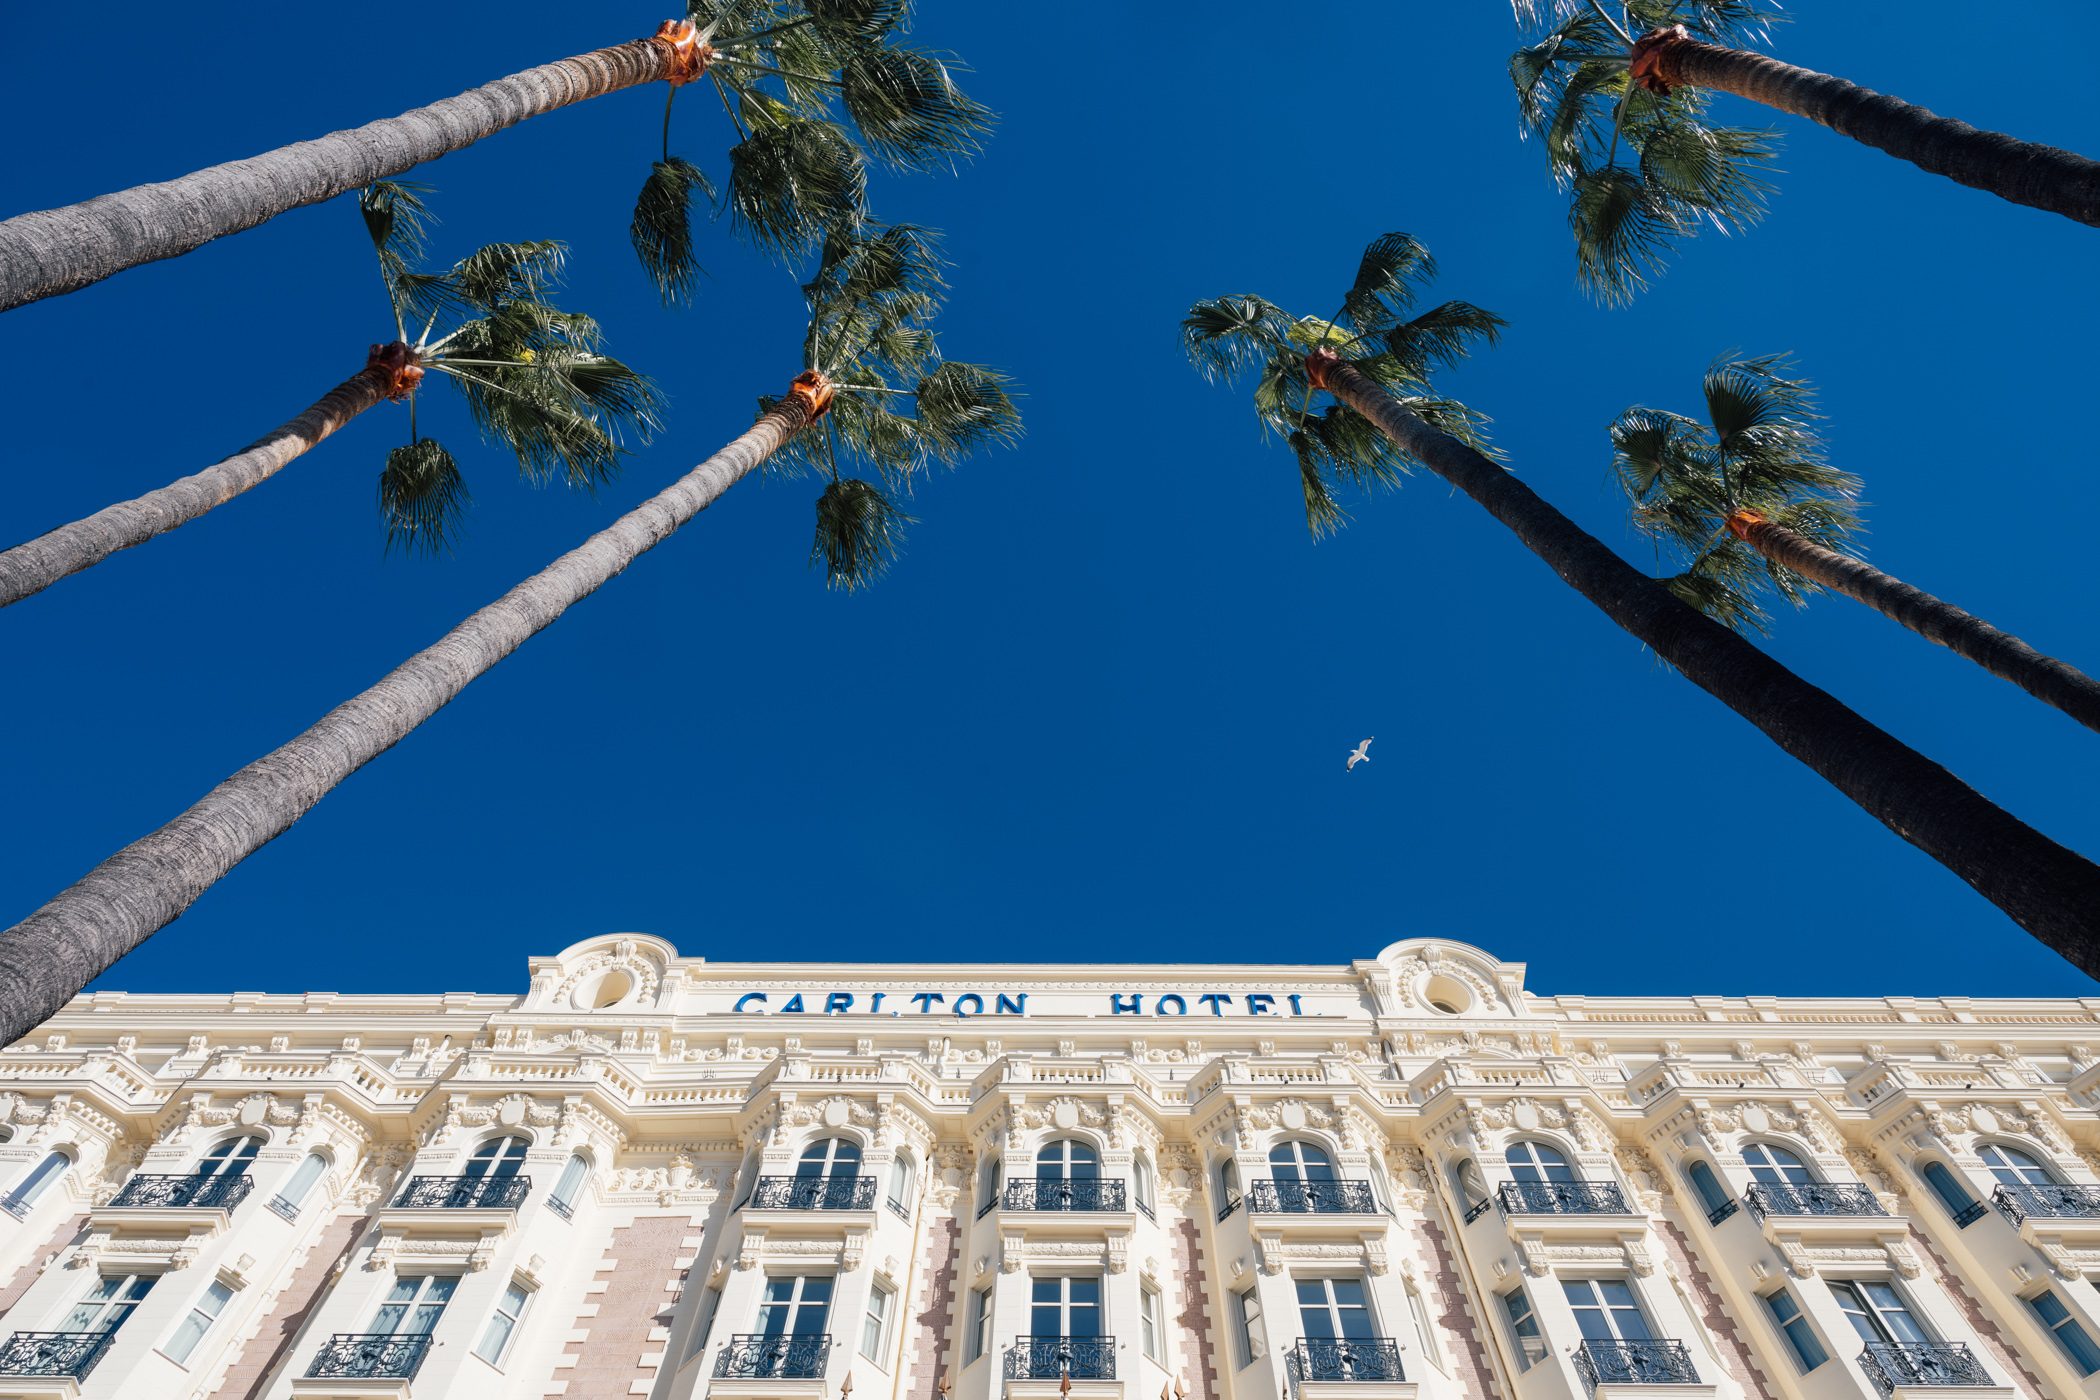 Carlton Cannes Hotel, Croisette - part of our Winter at the Côte d‘Azur in France: A travel guide